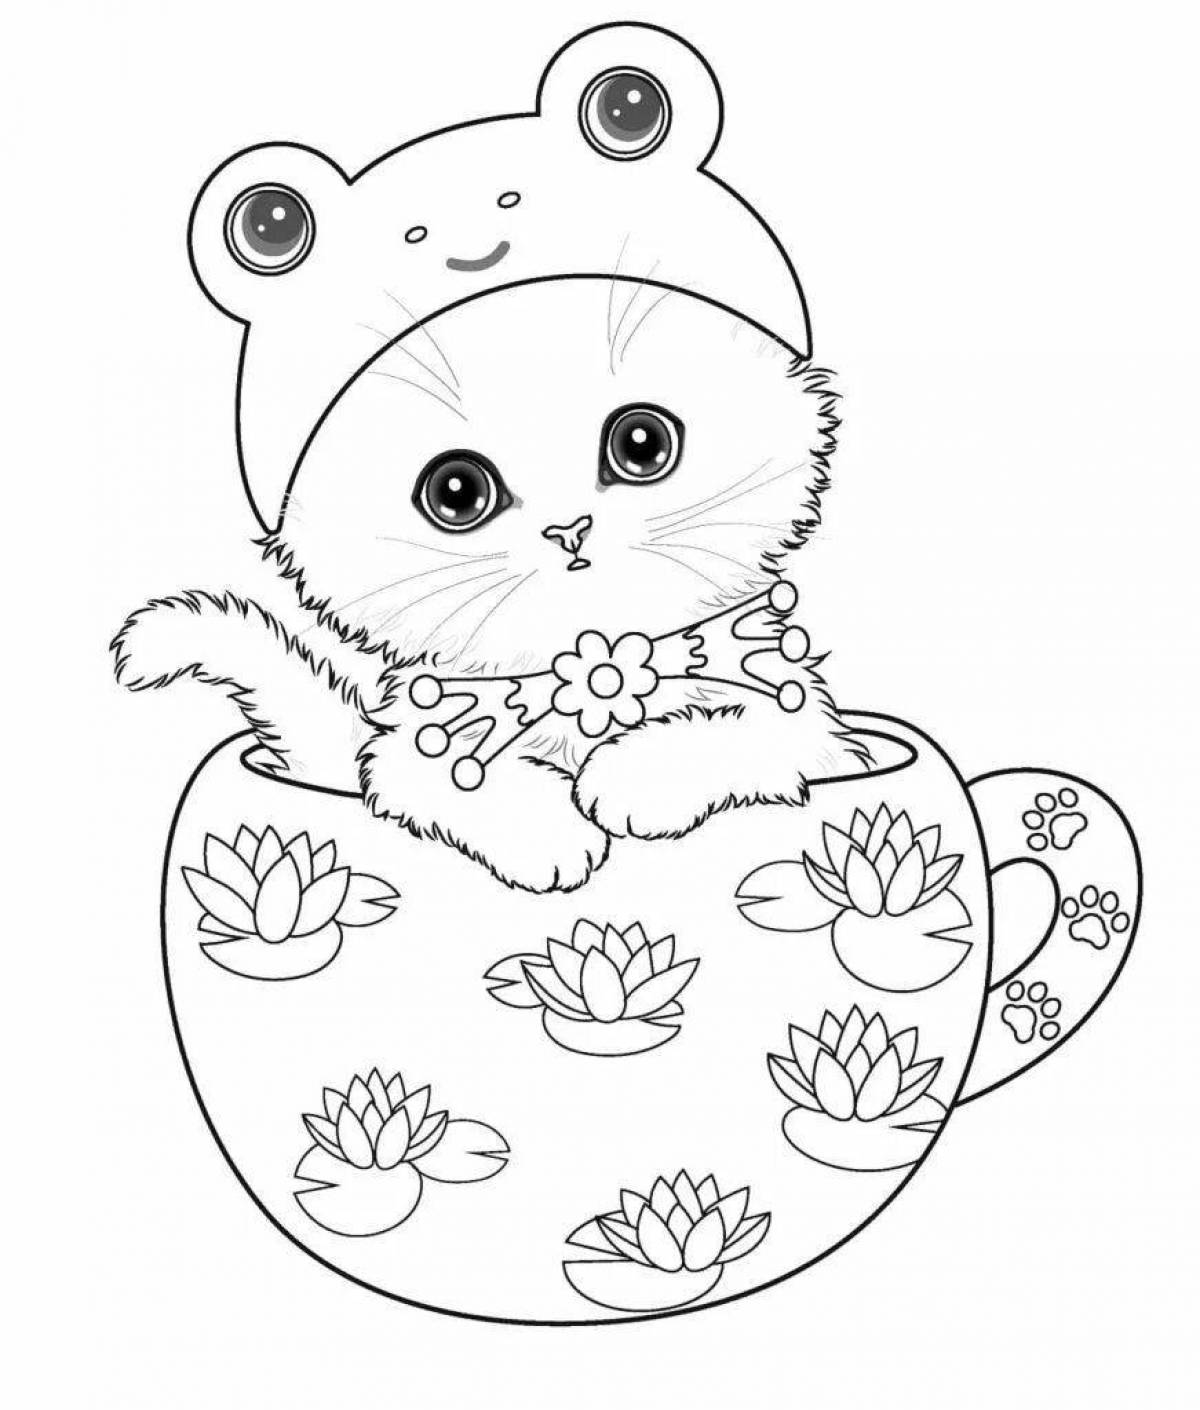 Fun coloring toy for cats